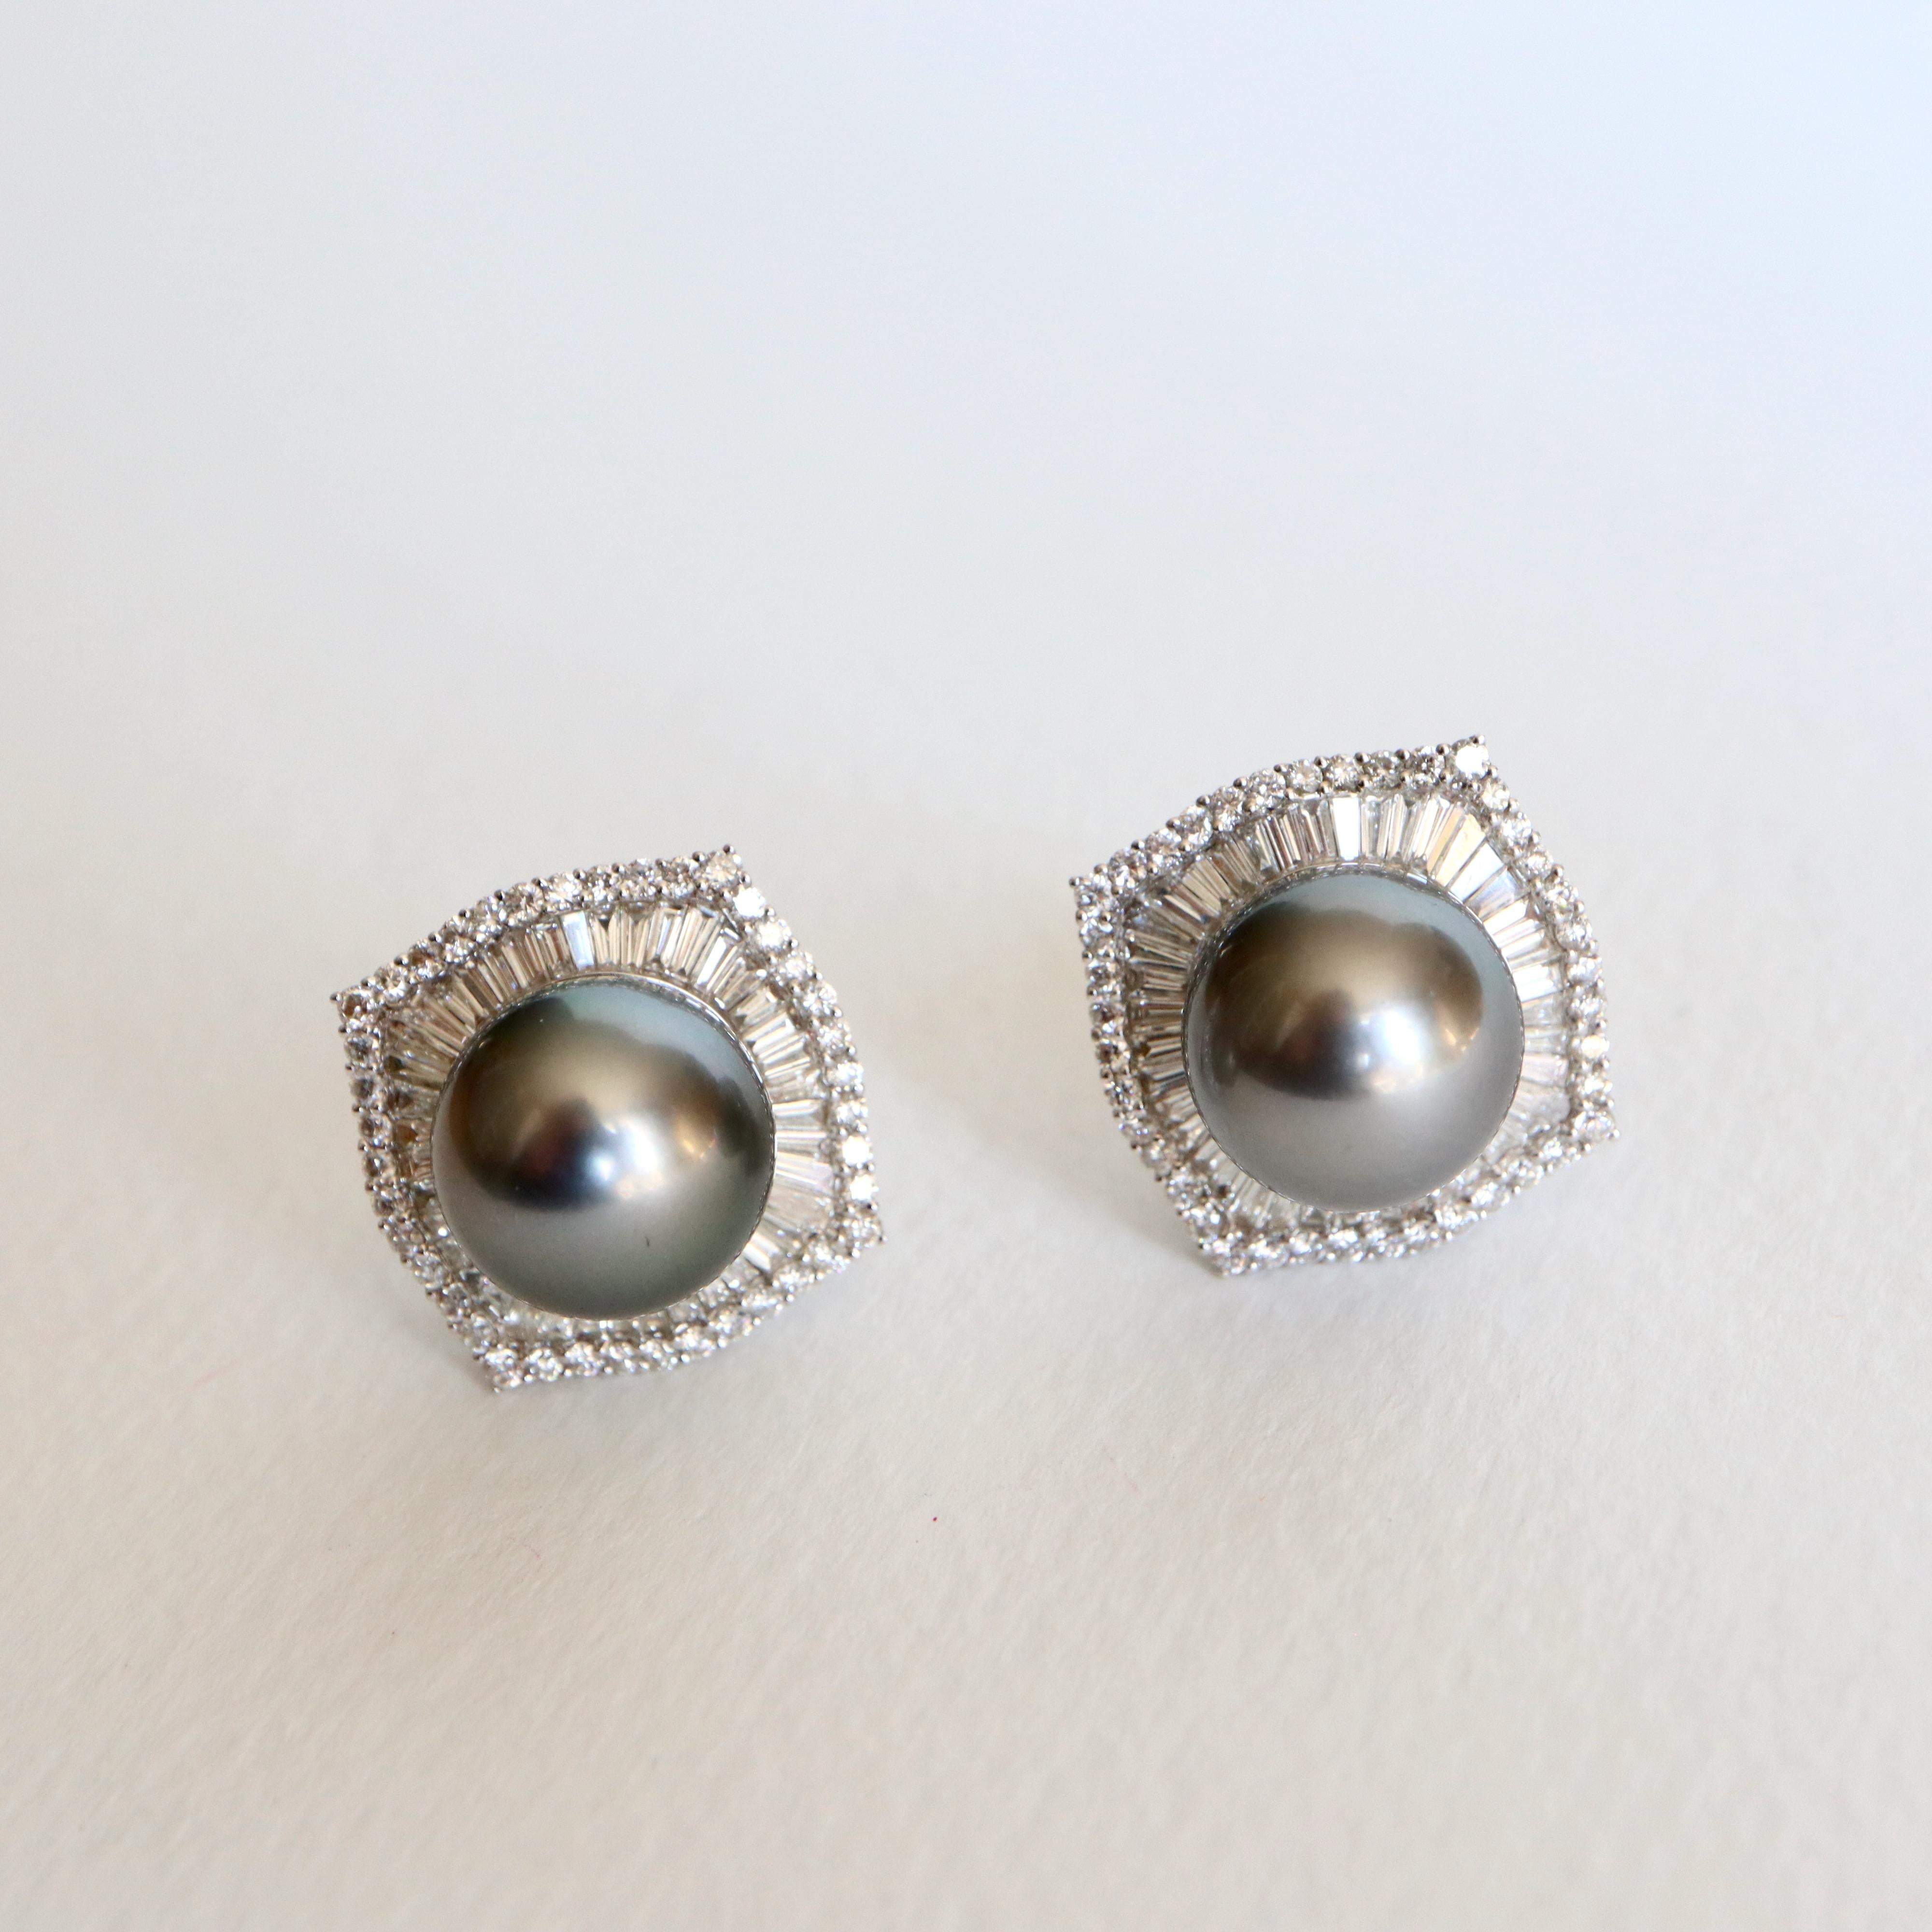 Earrings in 18-carat white gold, diamonds and gray Tahitian pearls. The pearls are surrounded by Baguette and Round diamonds  forming a somewhat square geometric pattern.
Very nice gold work on the back side of the earrings.
Bead diameter 14